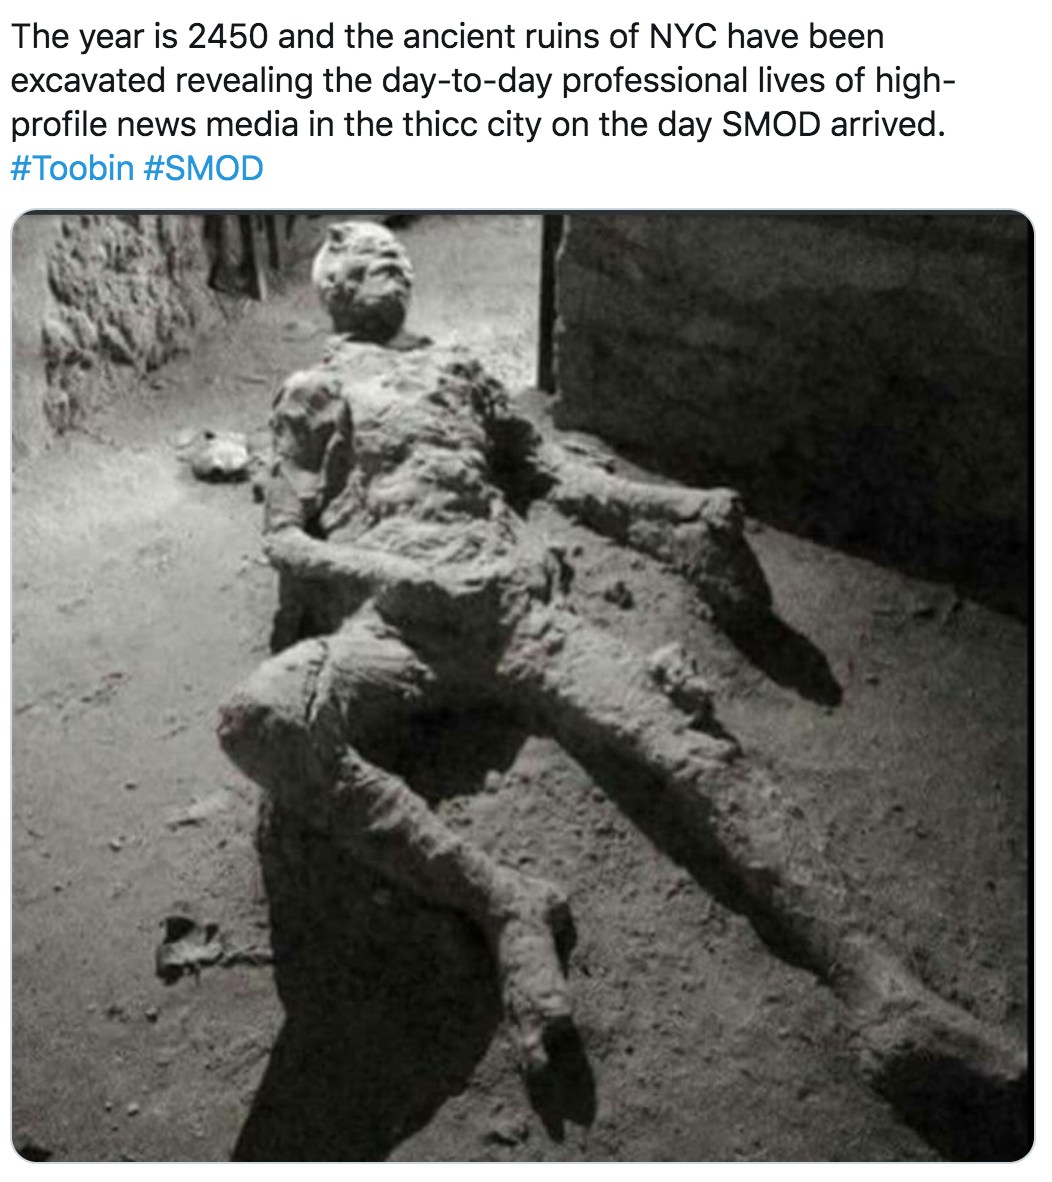 pompeii masturbator - The year is 2450 and the ancient ruins of Nyc have been excavated revealing the daytoday professional lives of high profile news media in the thicc city on the day Smod arrived.